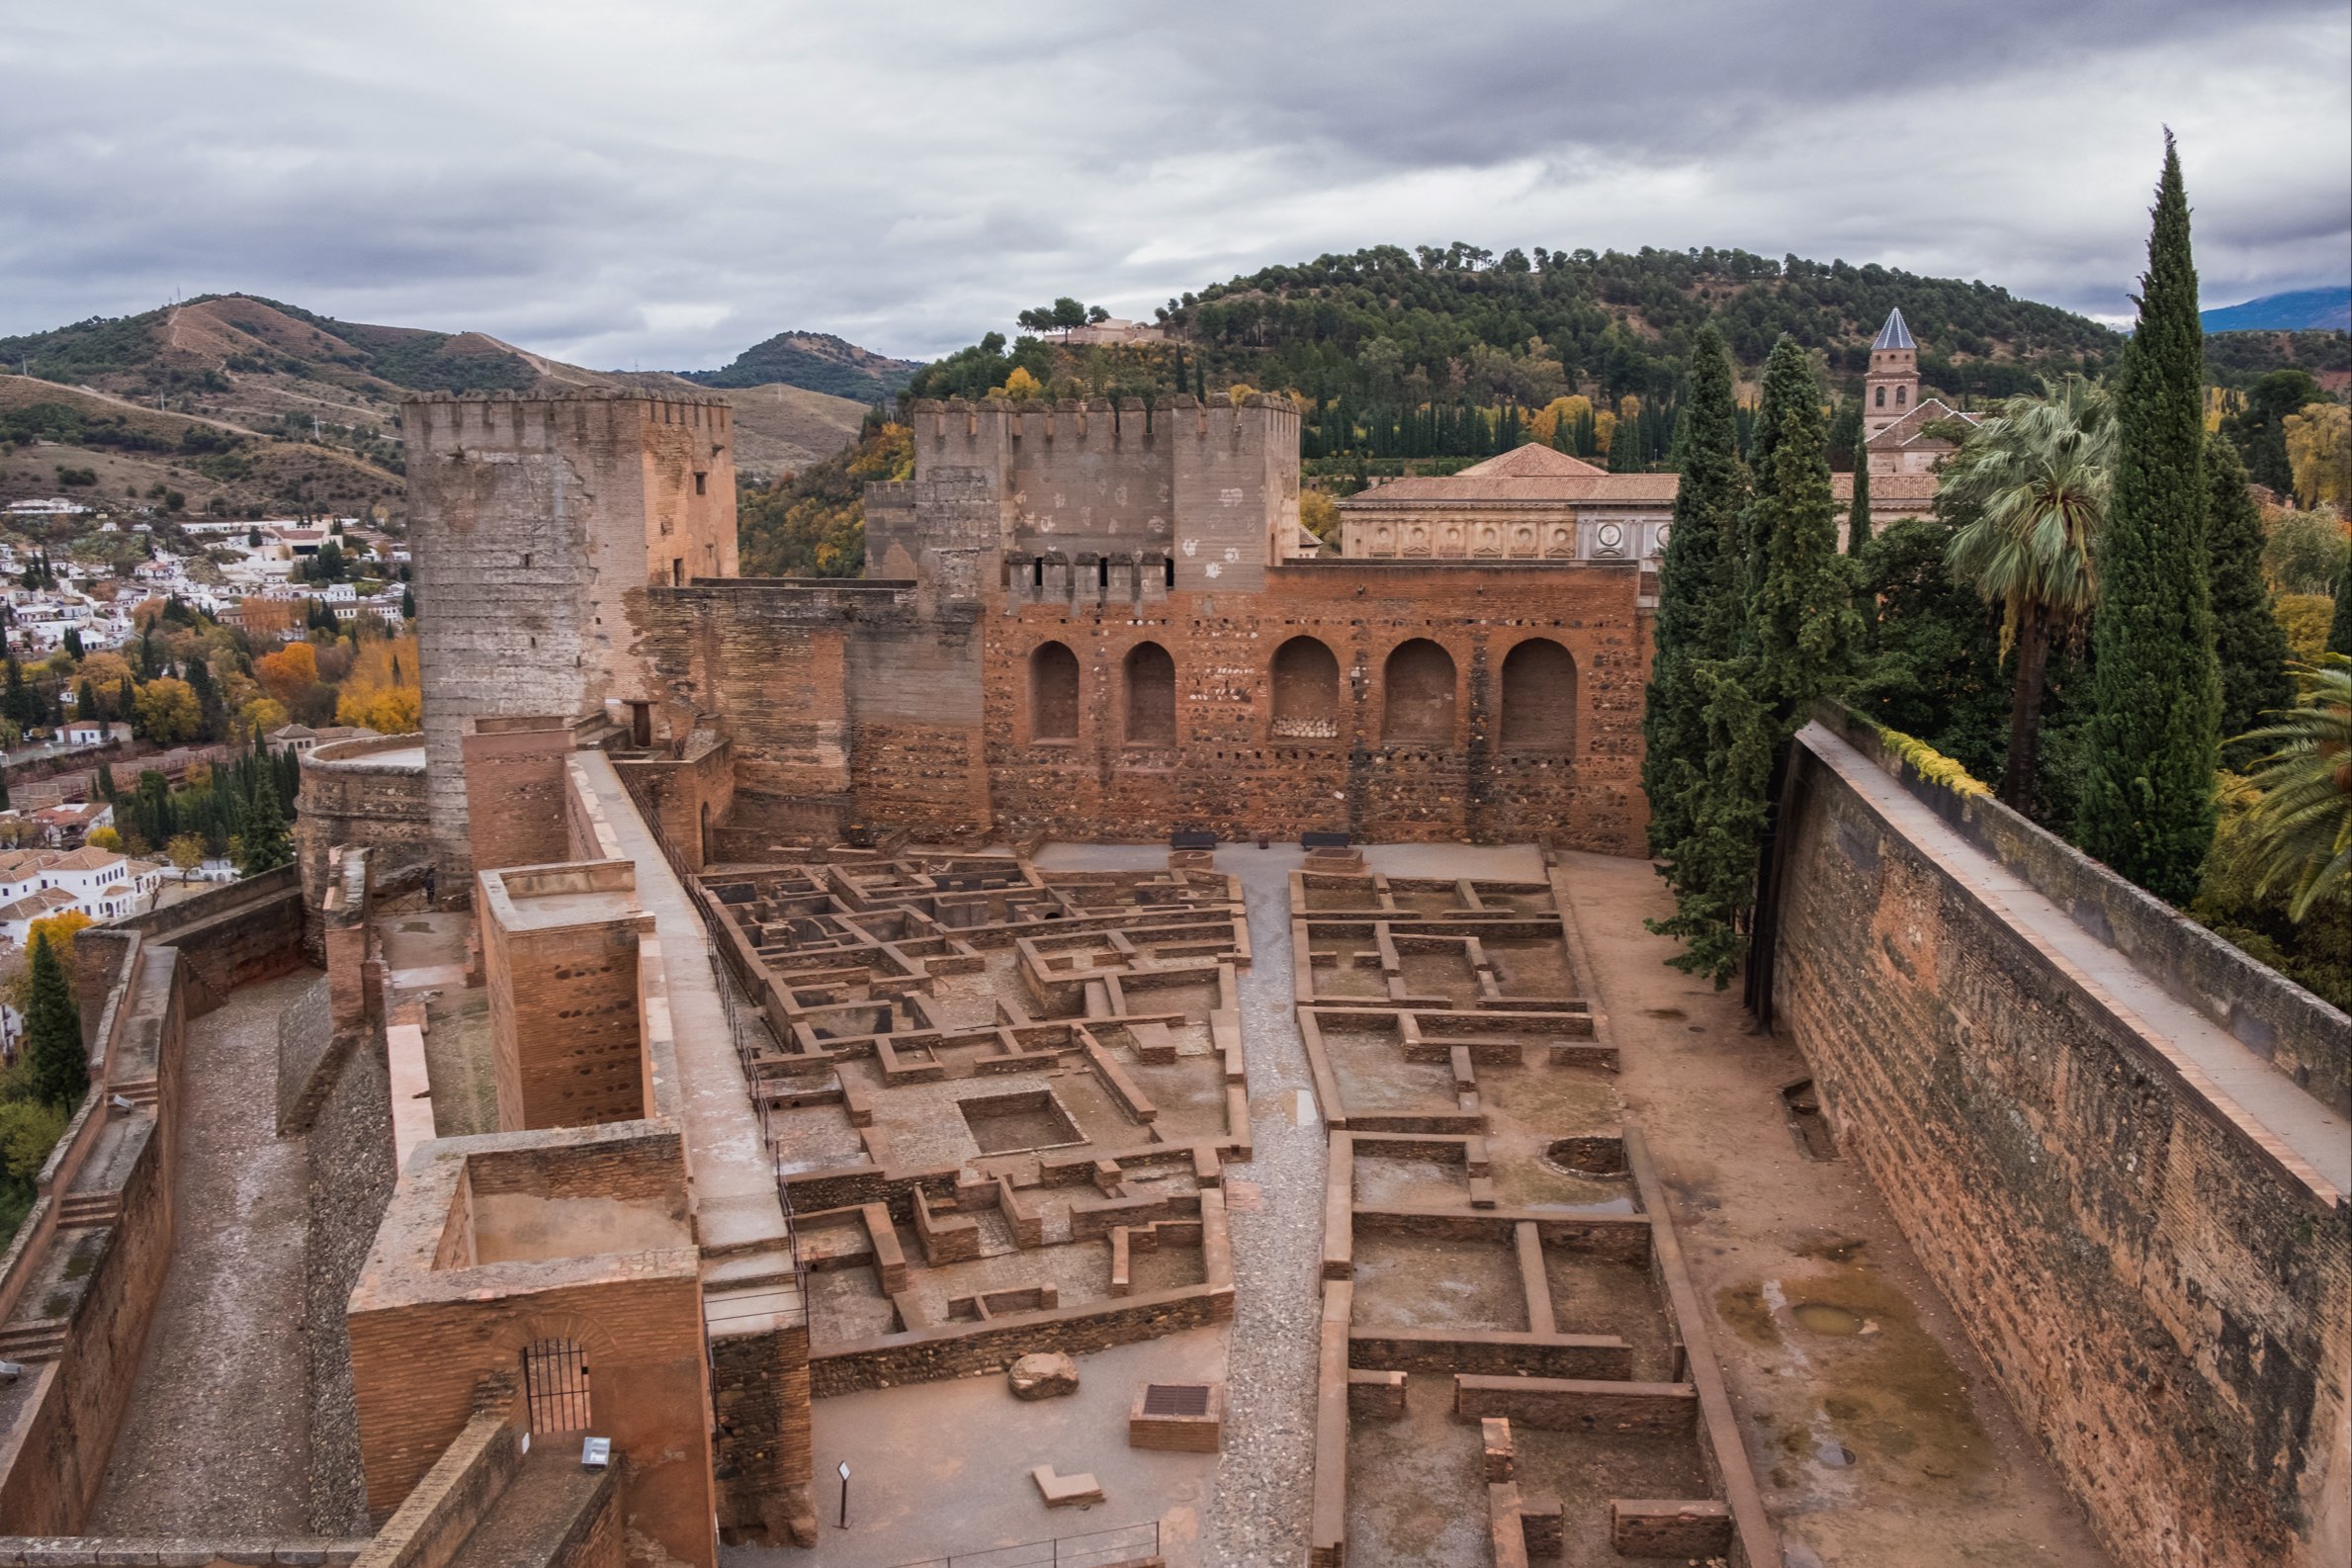 The Alcazaba fortification and ruins, The Alhambra, Granada